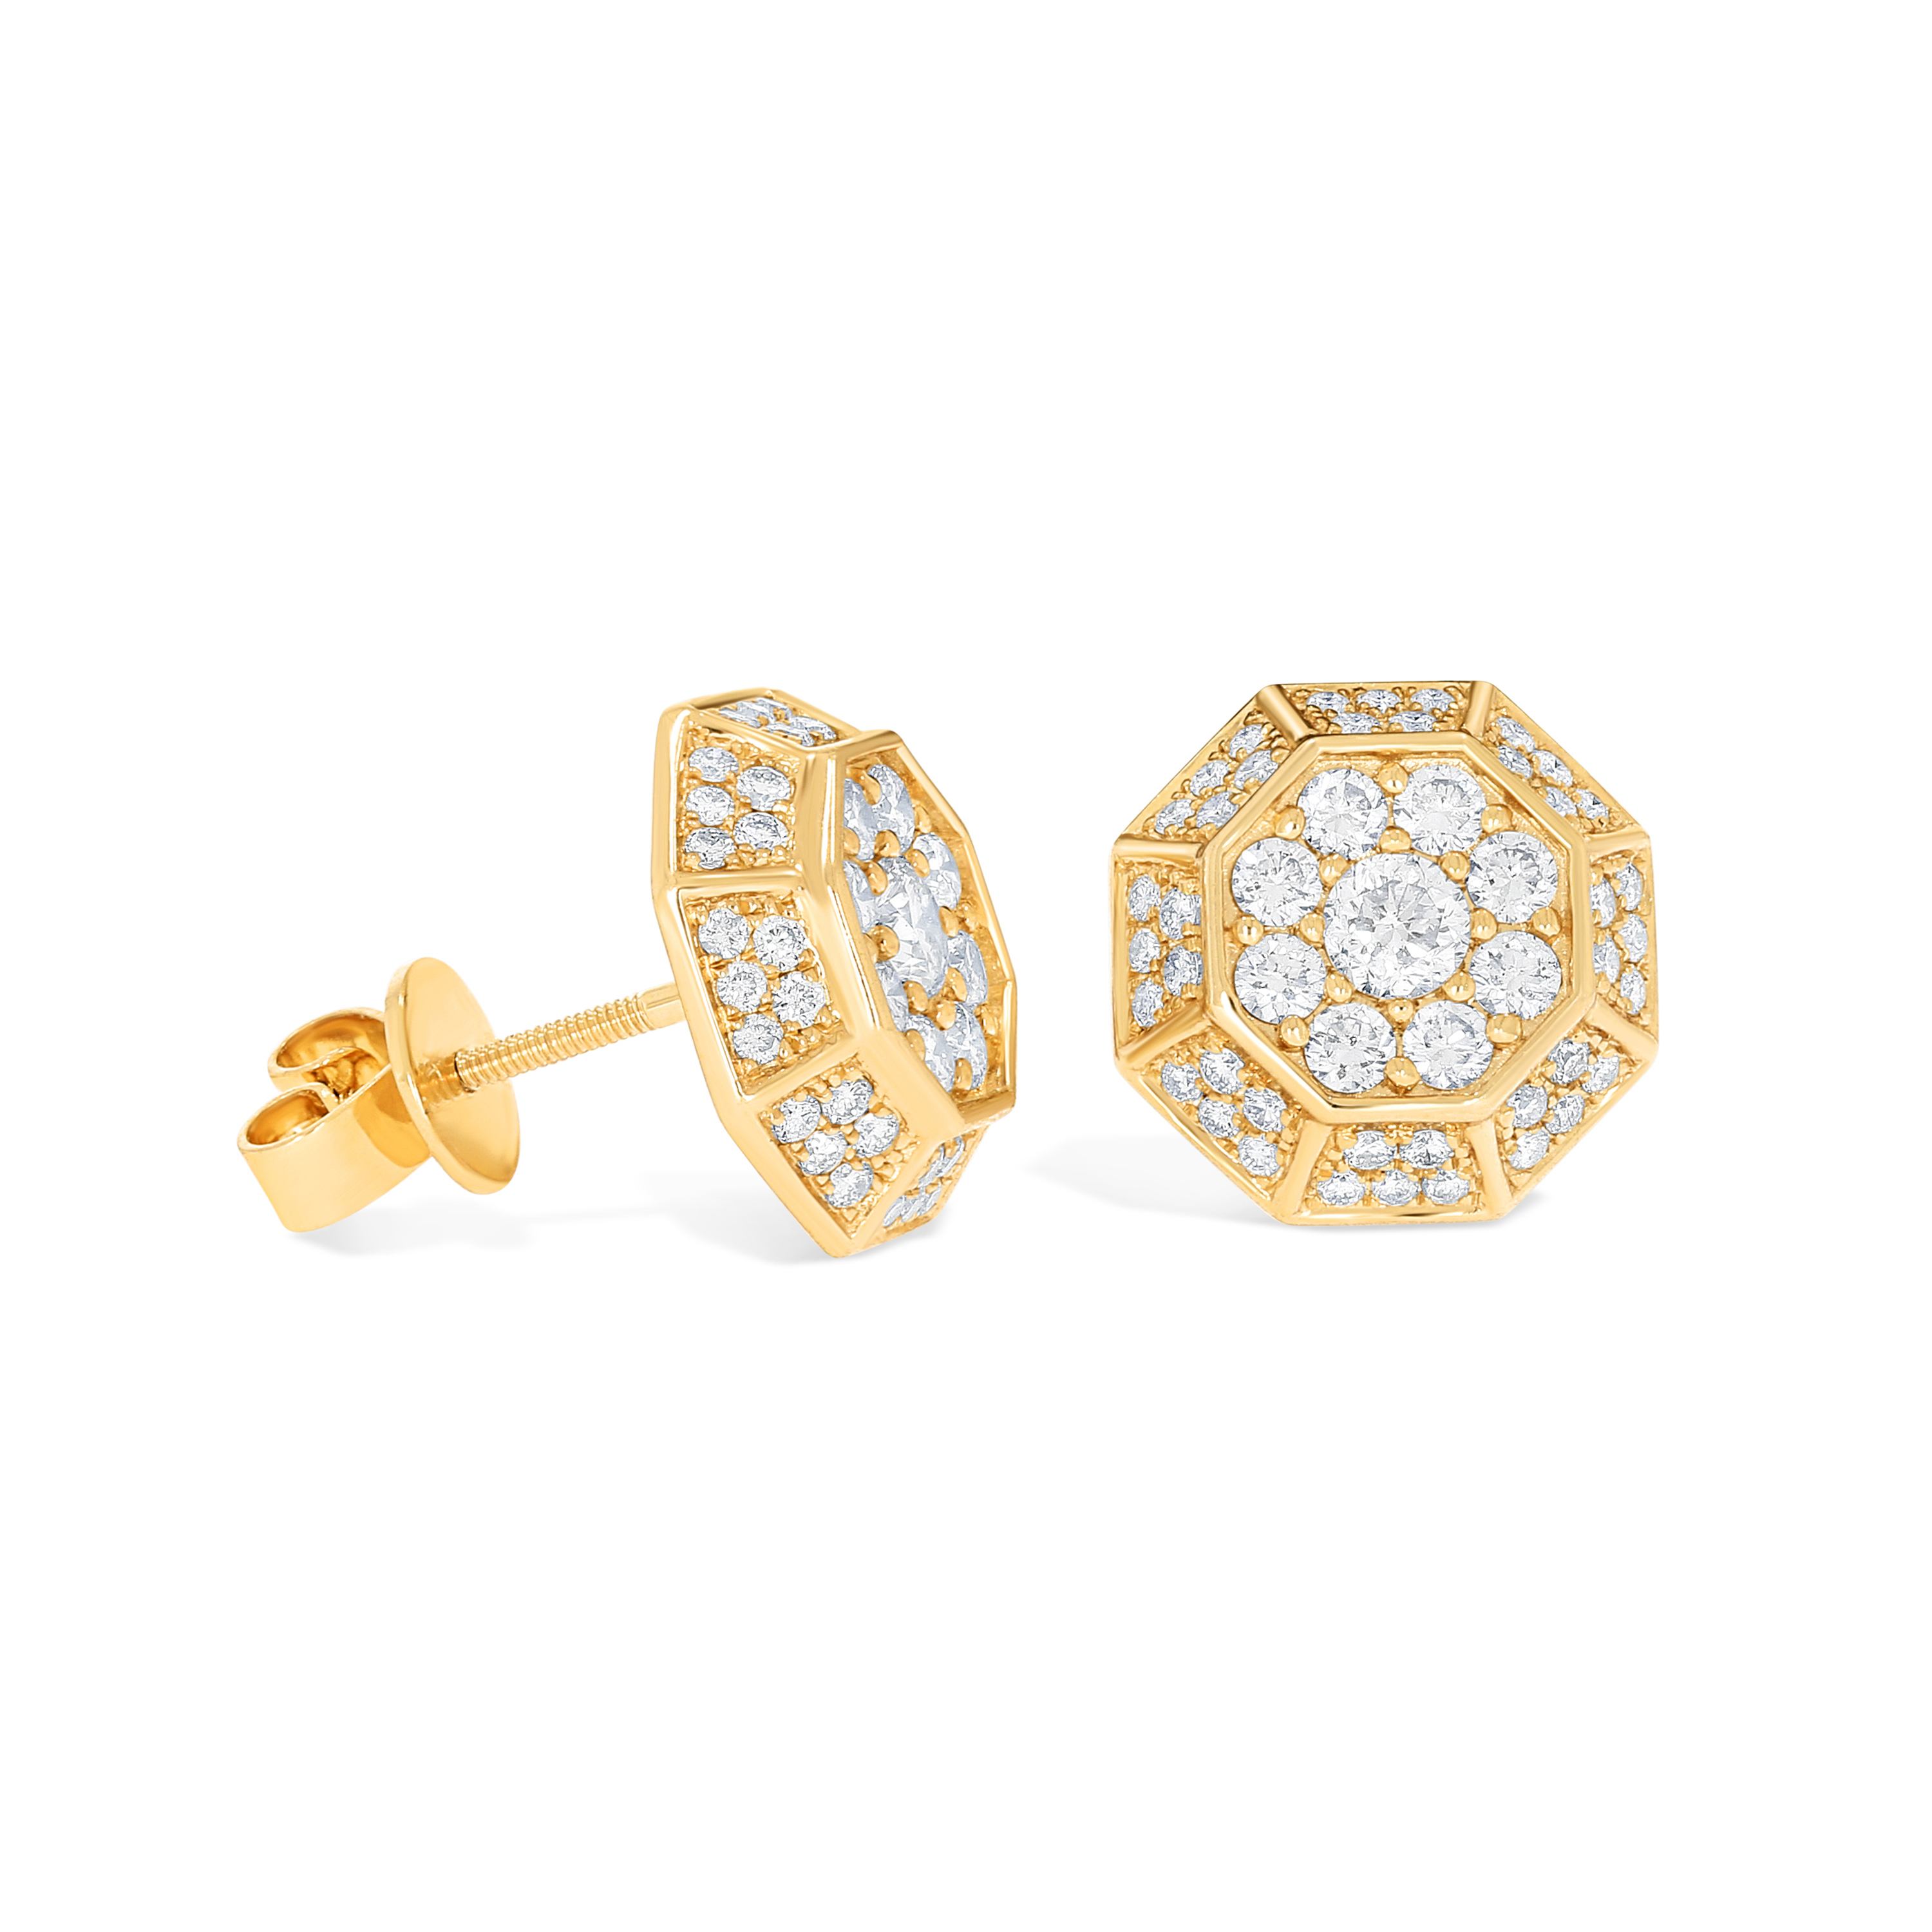 Octagon Cluster Diamond Earrings 1.47 ct. 10k Yellow Gold